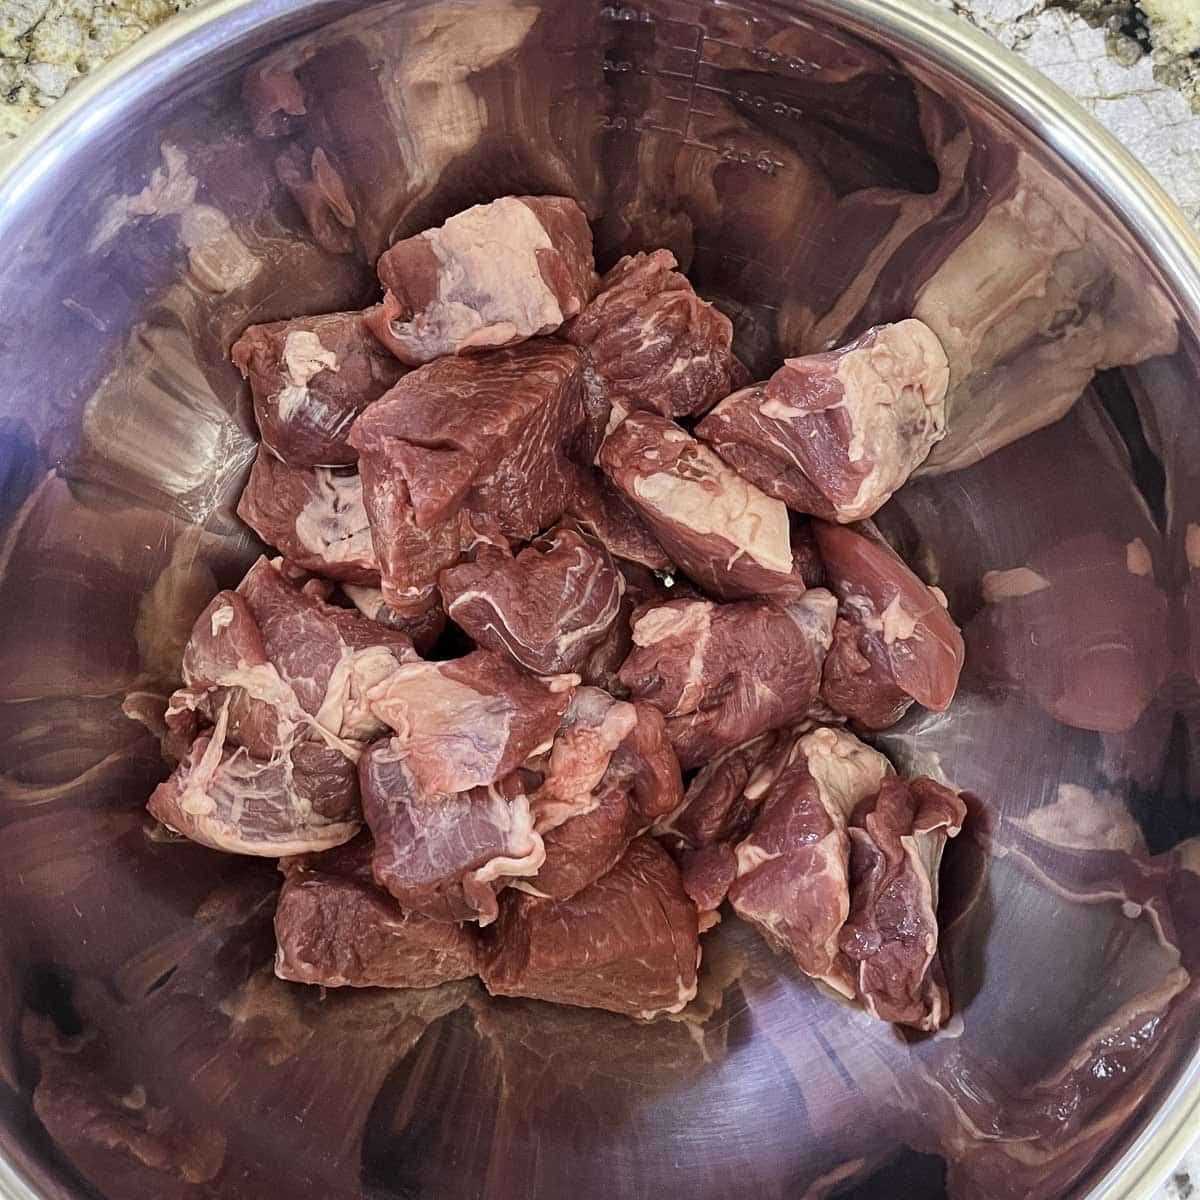 cubed raw lamb in a silver bowl